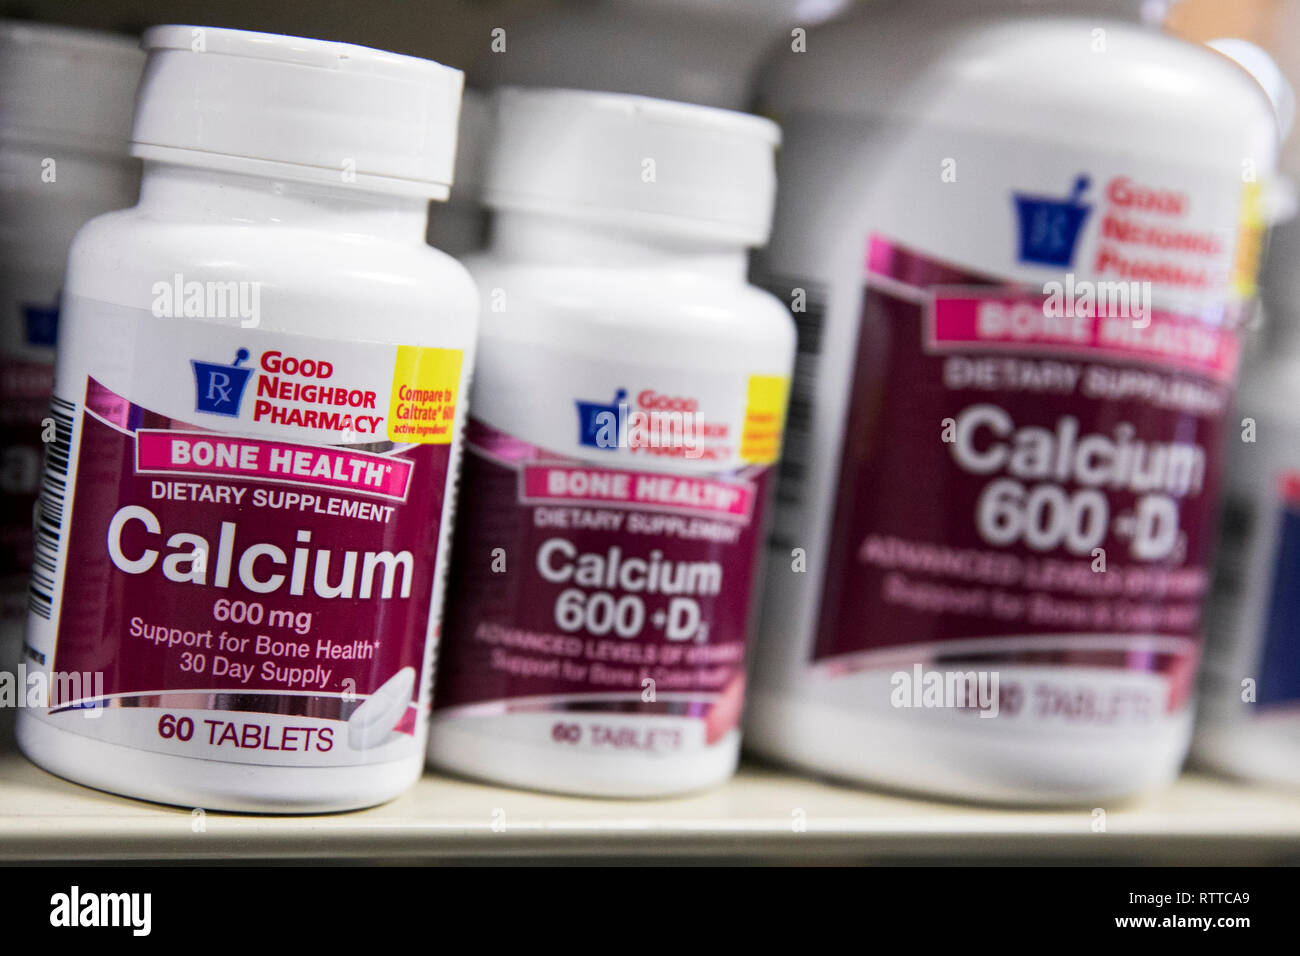 Bottles of Calcium supplements photographed in a pharmacy. Stock Photo